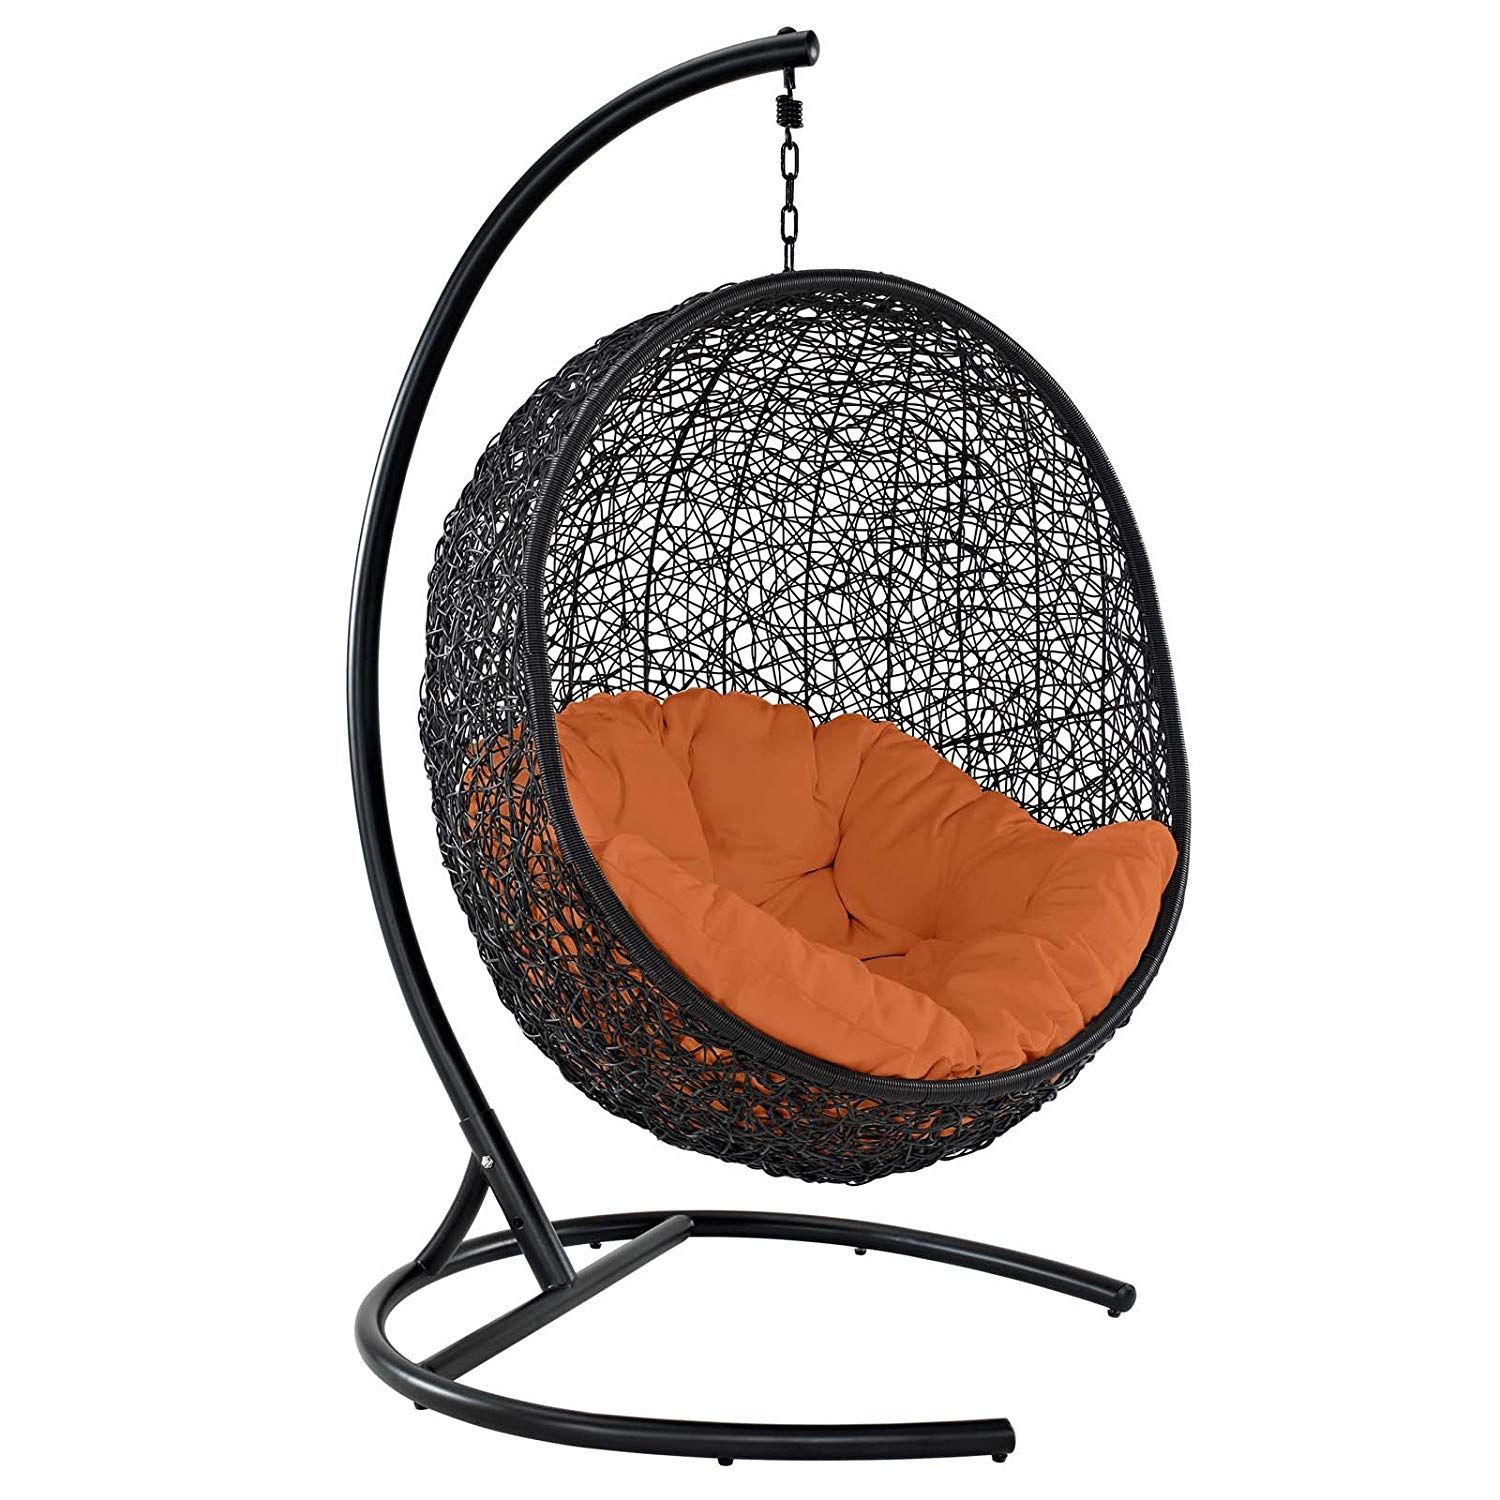 12 Best Hanging Egg Chairs To Buy In 2020 – Outdoor & Indoor Pertaining To Outdoor Wicker Plastic Tear Porch Swings With Stand (View 7 of 25)